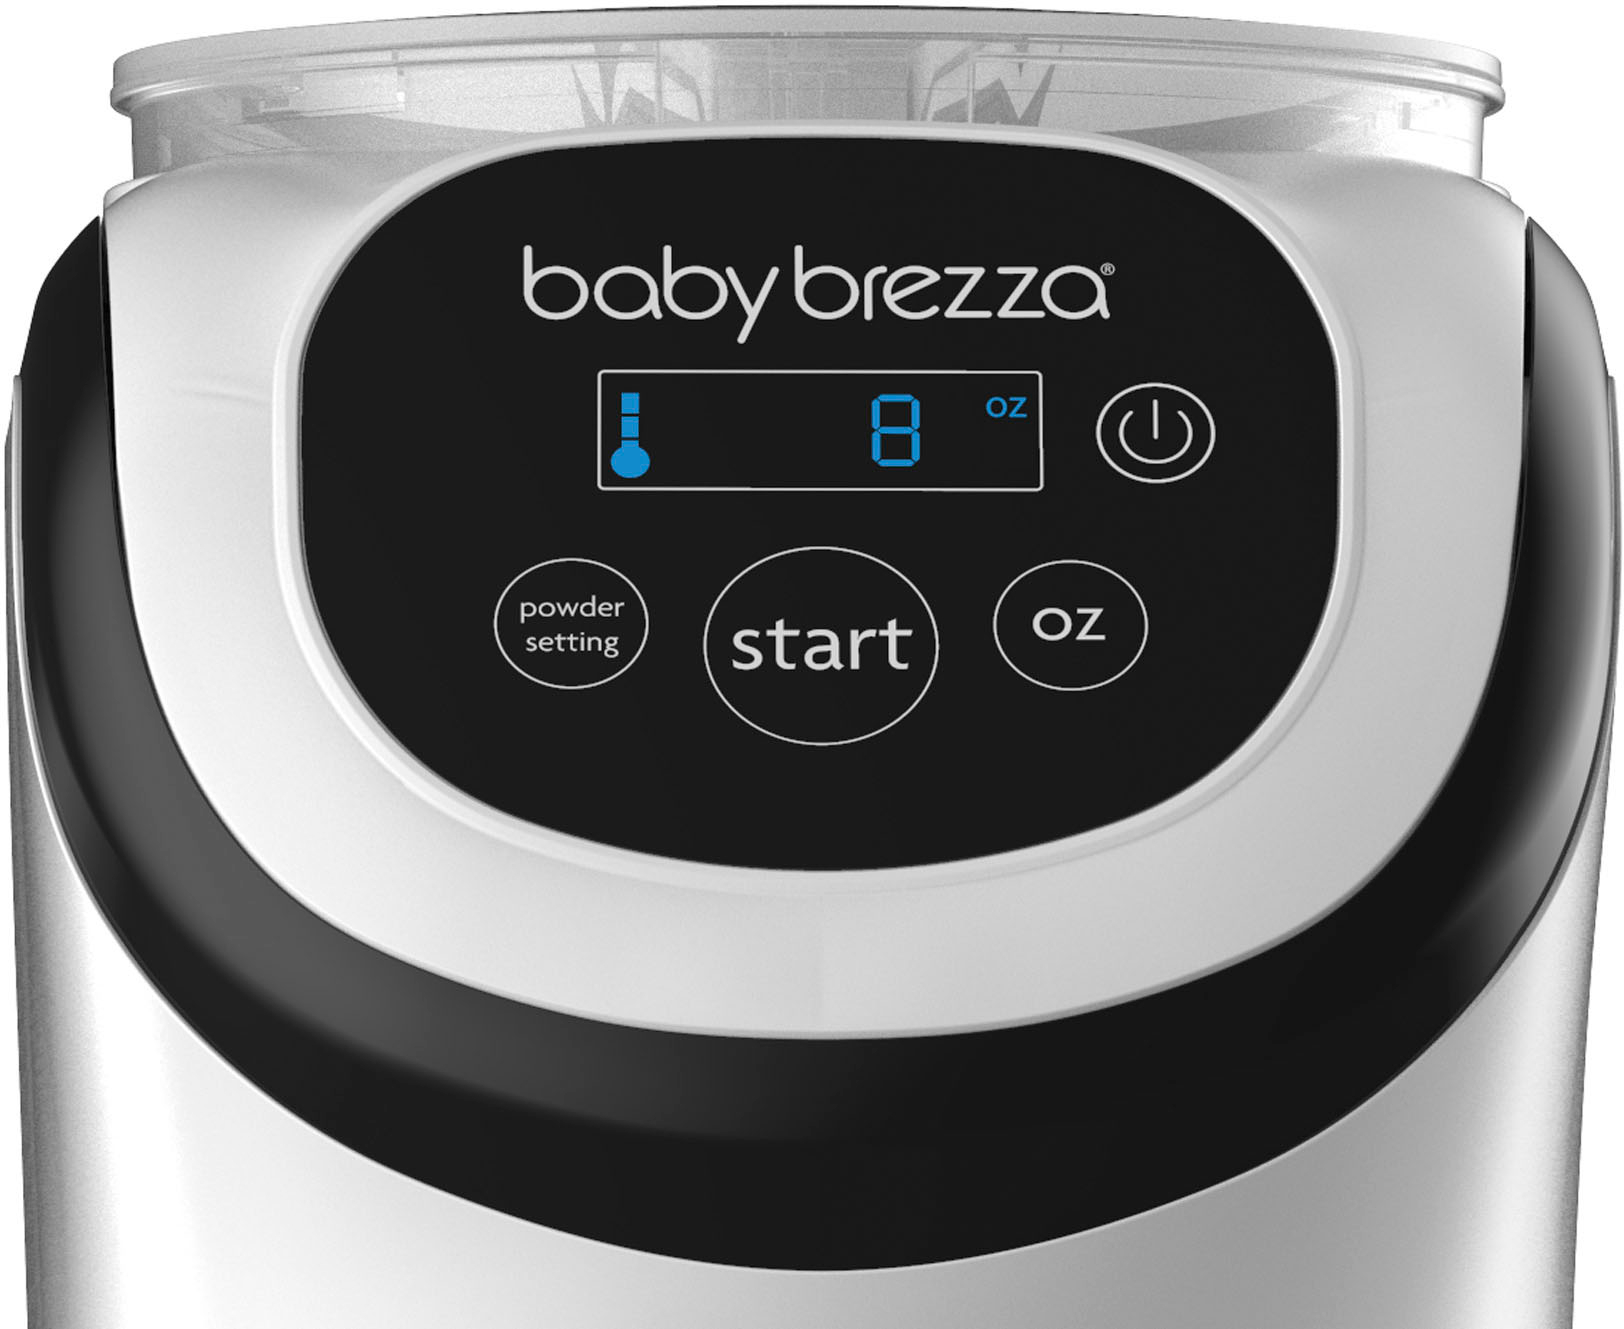 Baby Brezza Formula Pro Mini Baby Formula Maker Small Baby Formula Mixer  Machine Fits Small Spaces and is Portable for Travel Bottle Makers Makes  The Perfect Bottle for Your Infant On The